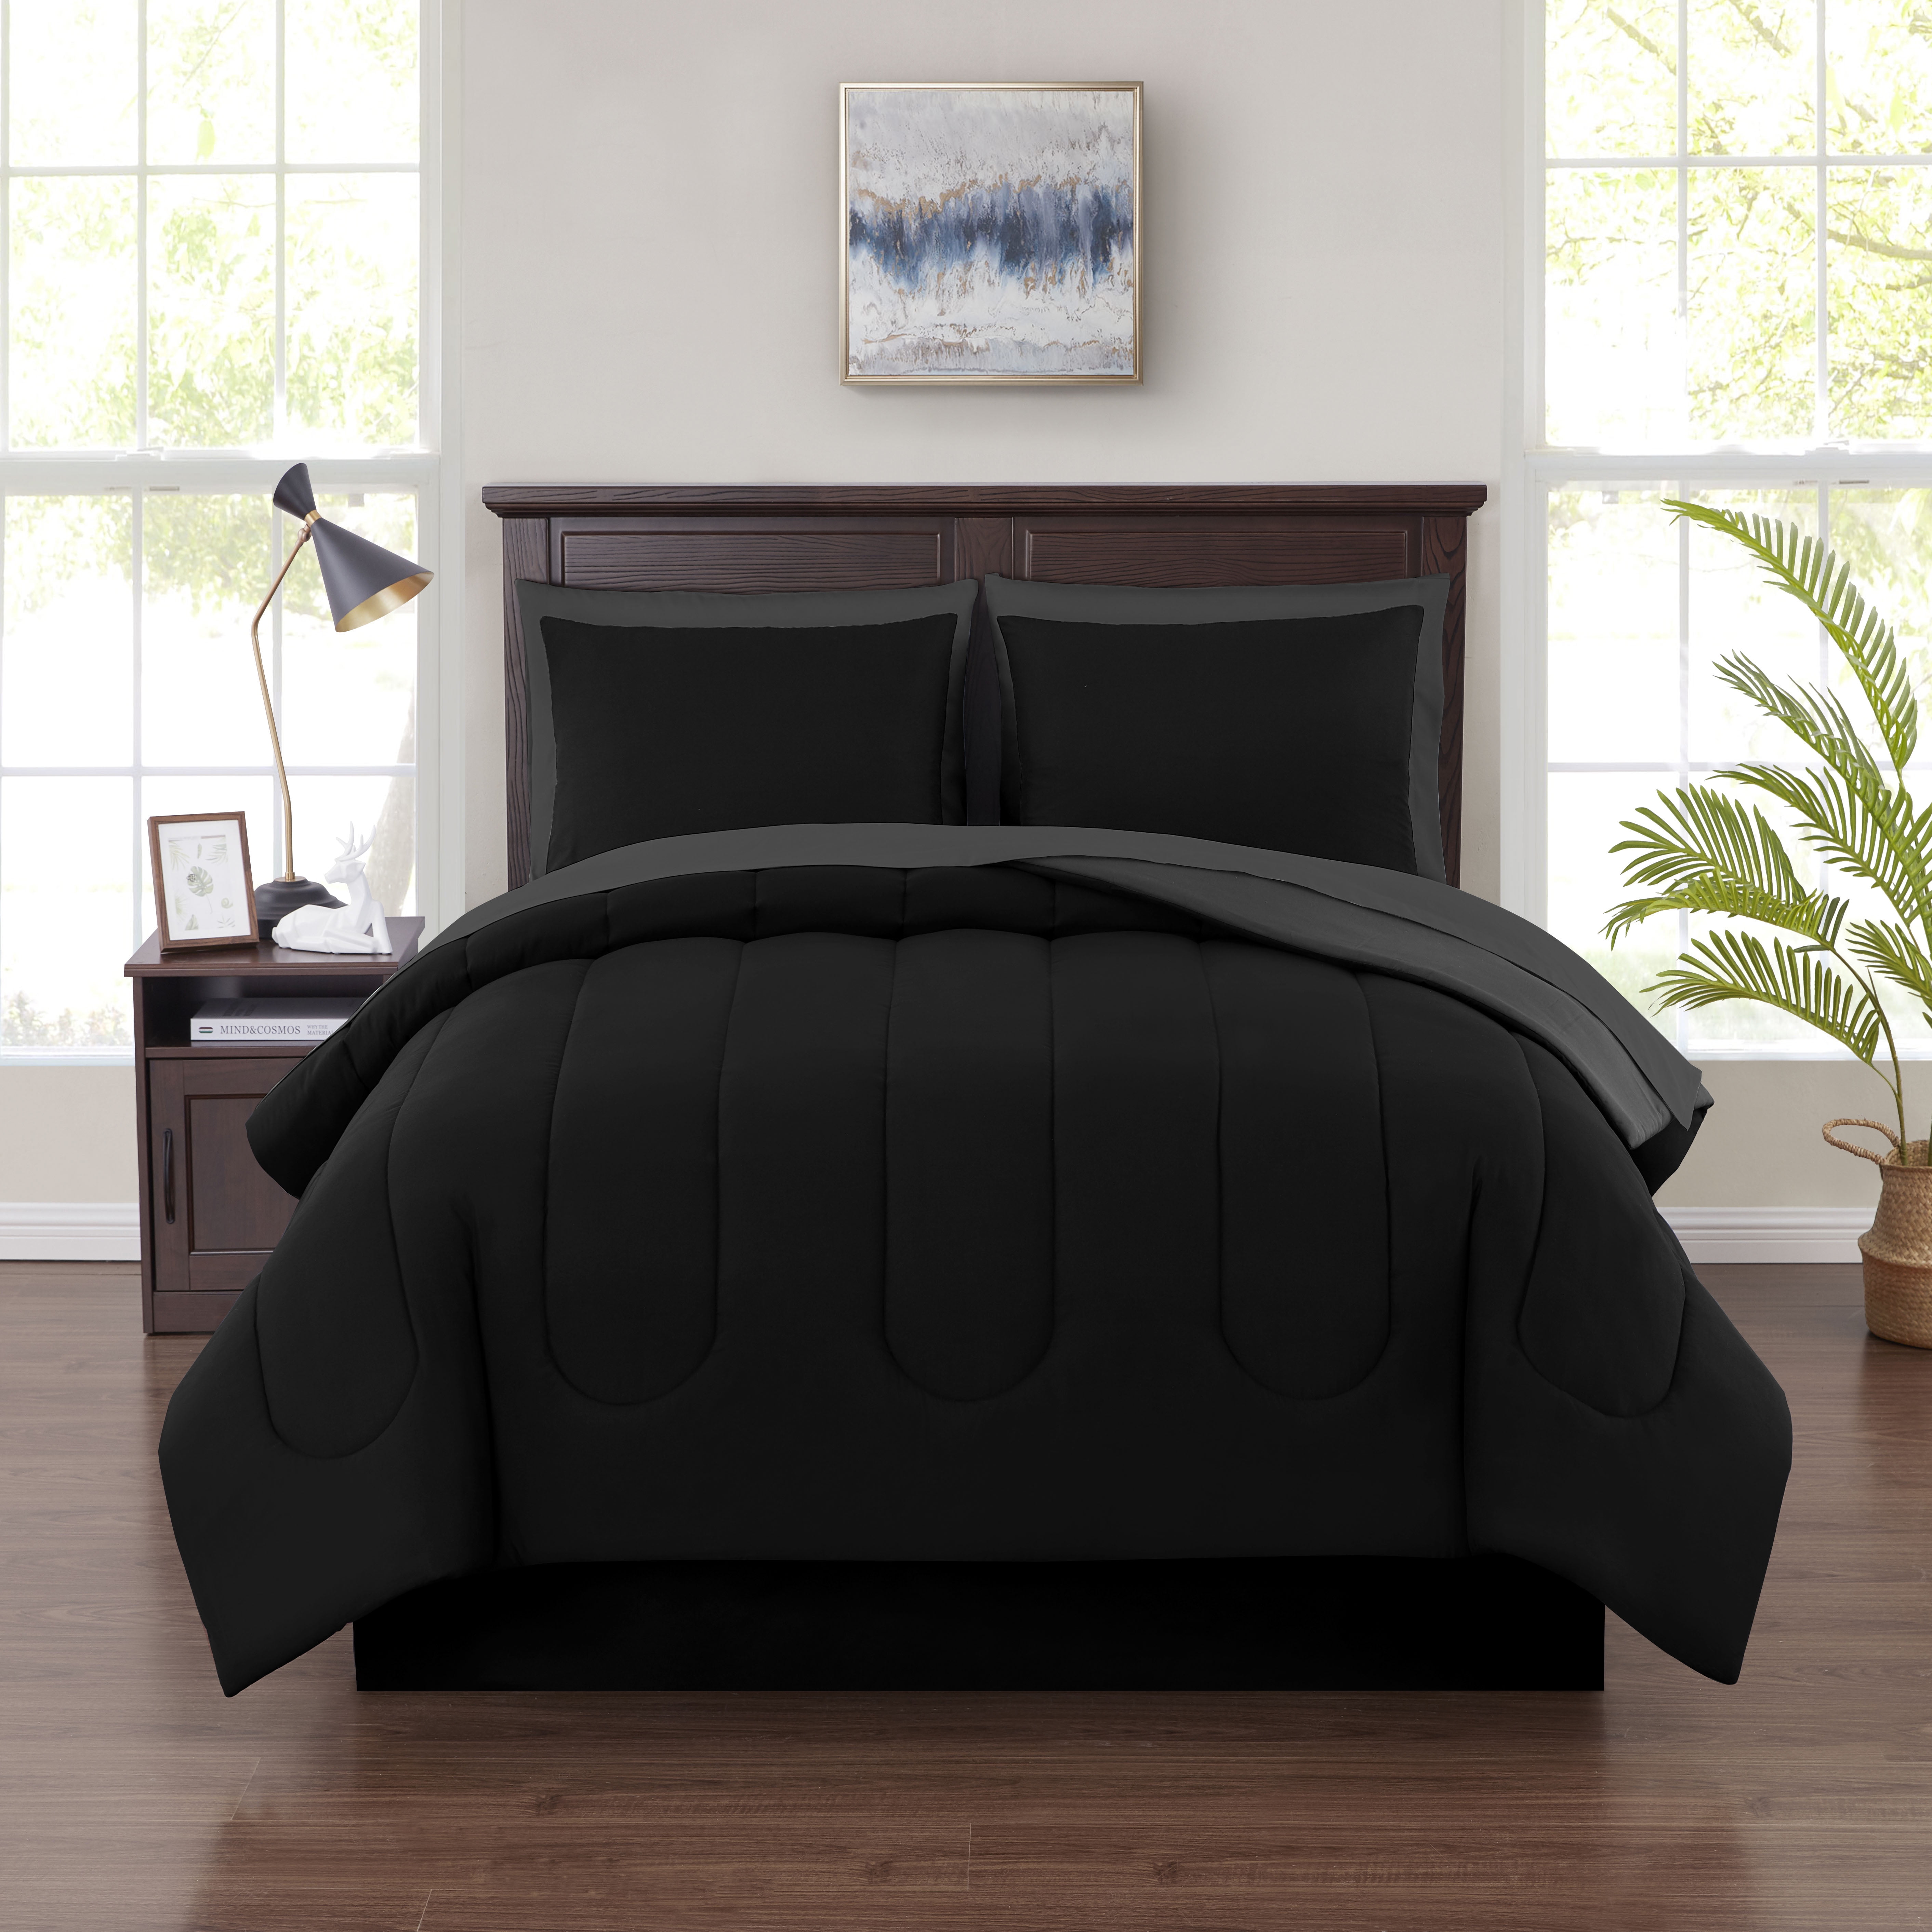 Boys Bed Sets Queen with Comforter and Sheets Bedding Comforter Sets Bedsure Black Twin XL Bed in A Bag 6 Pieces Reversible Bedding Sets for Kids